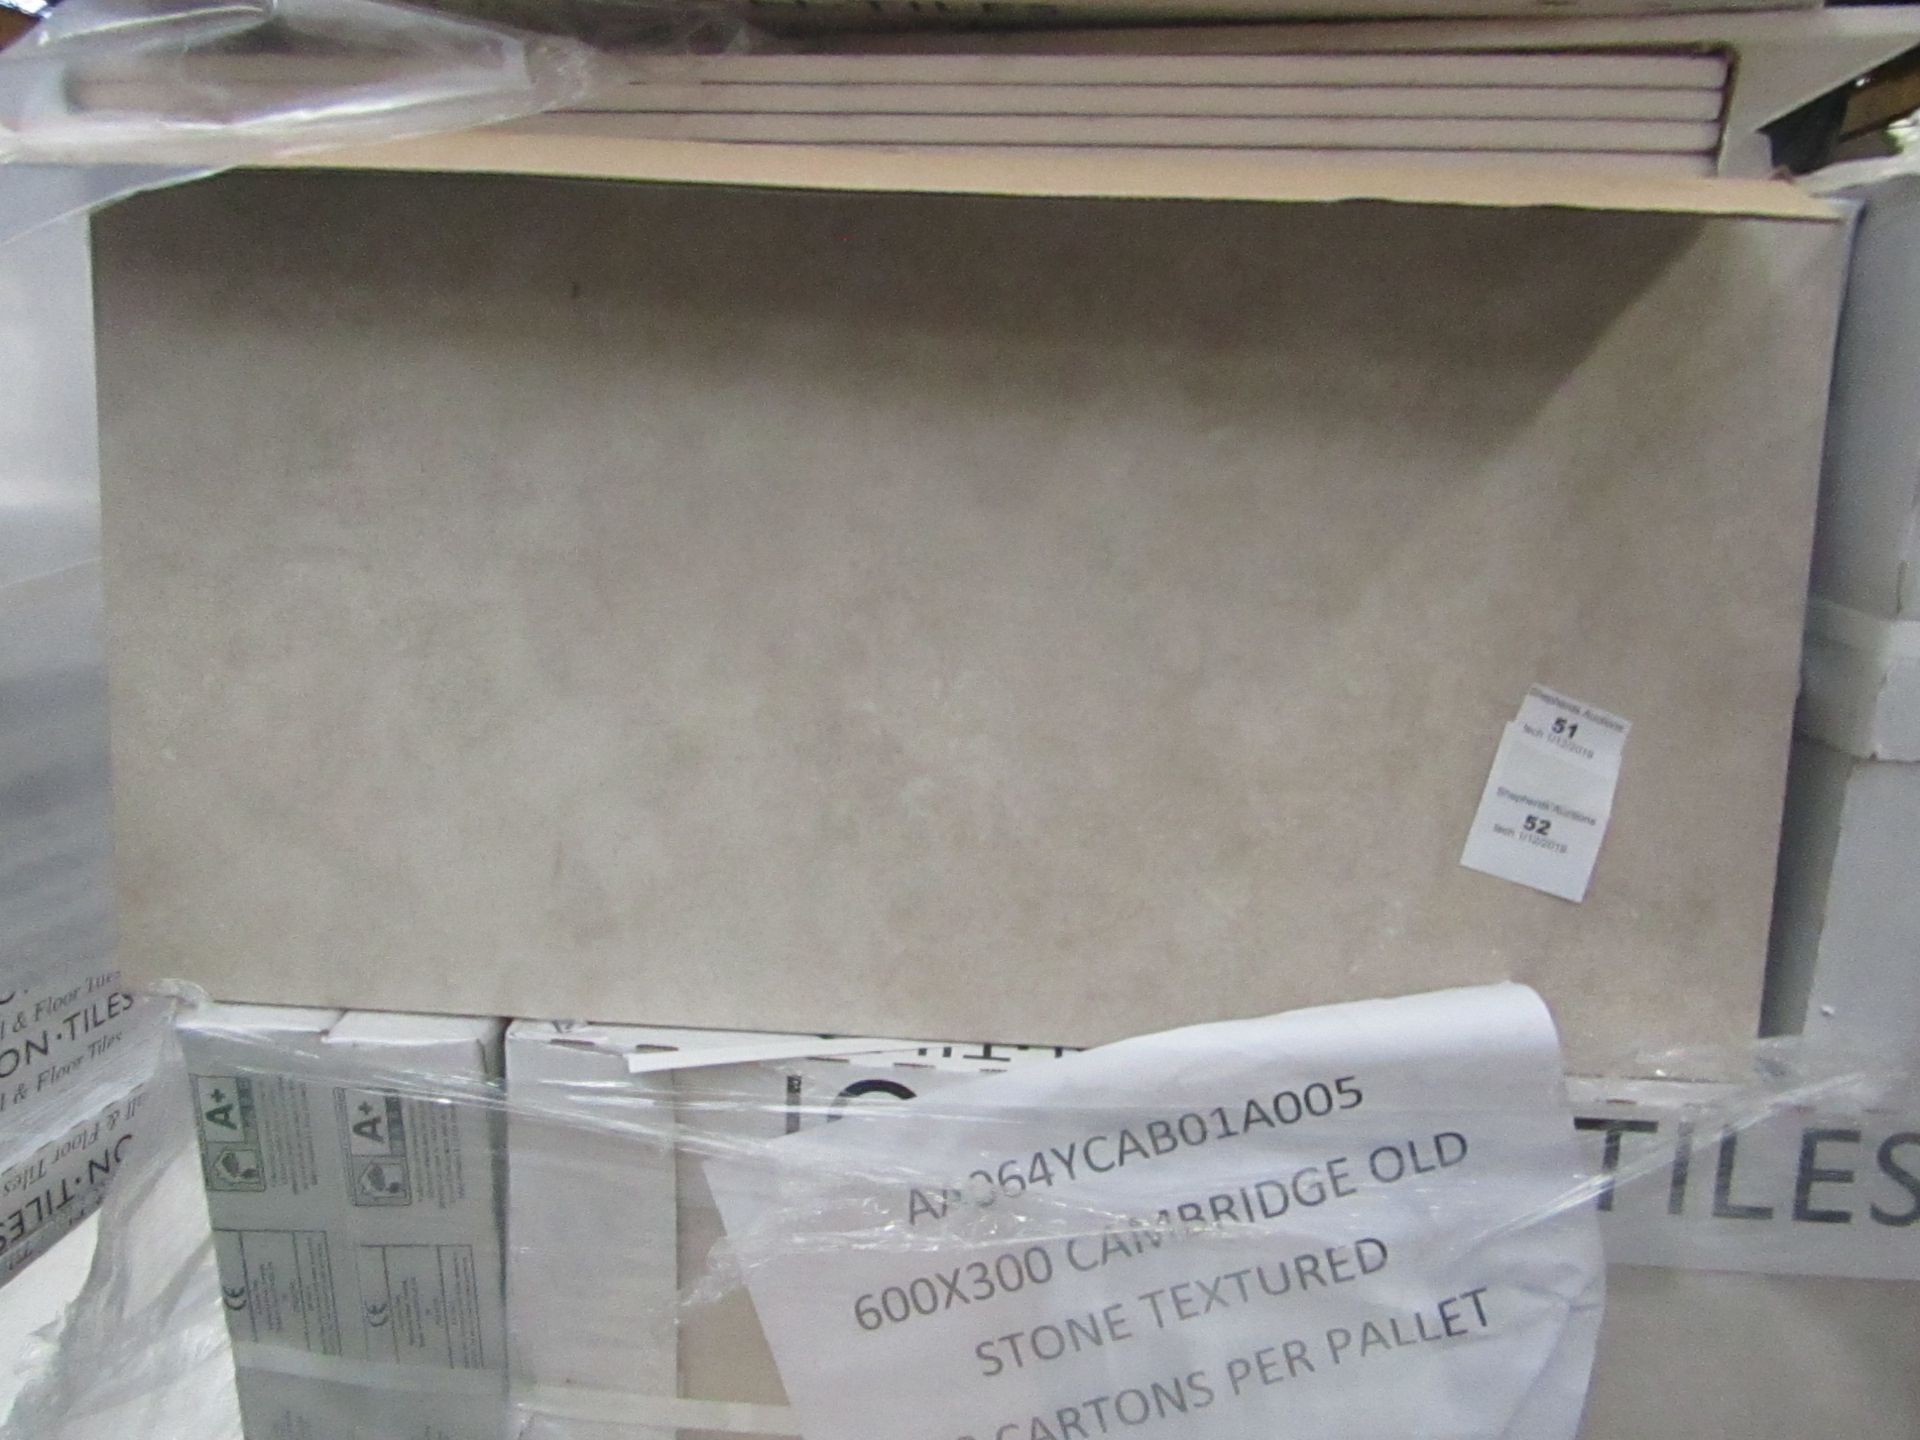 10x Packs of 5 Cambridge Old Stone textured 300x600 wall and Floor Tiles By Johnsons, New, the RRP